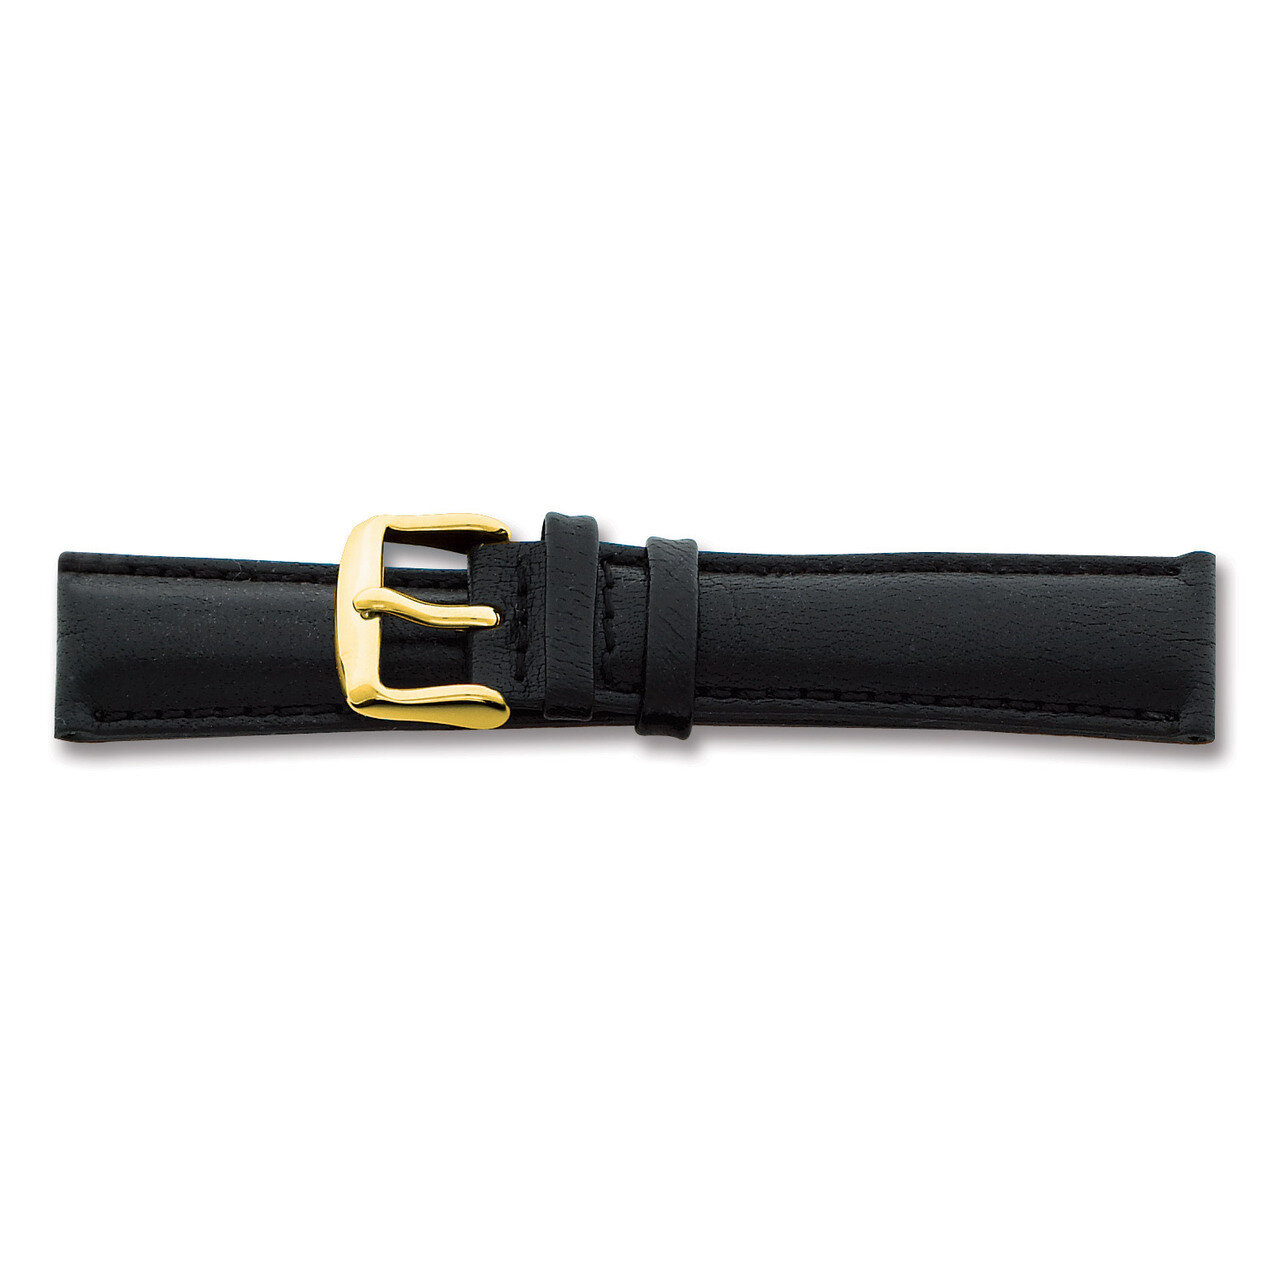 26mm Black Smooth Leather Chrono Buckle Watch Band 7.5 Inch Gold-tone BAY141-26